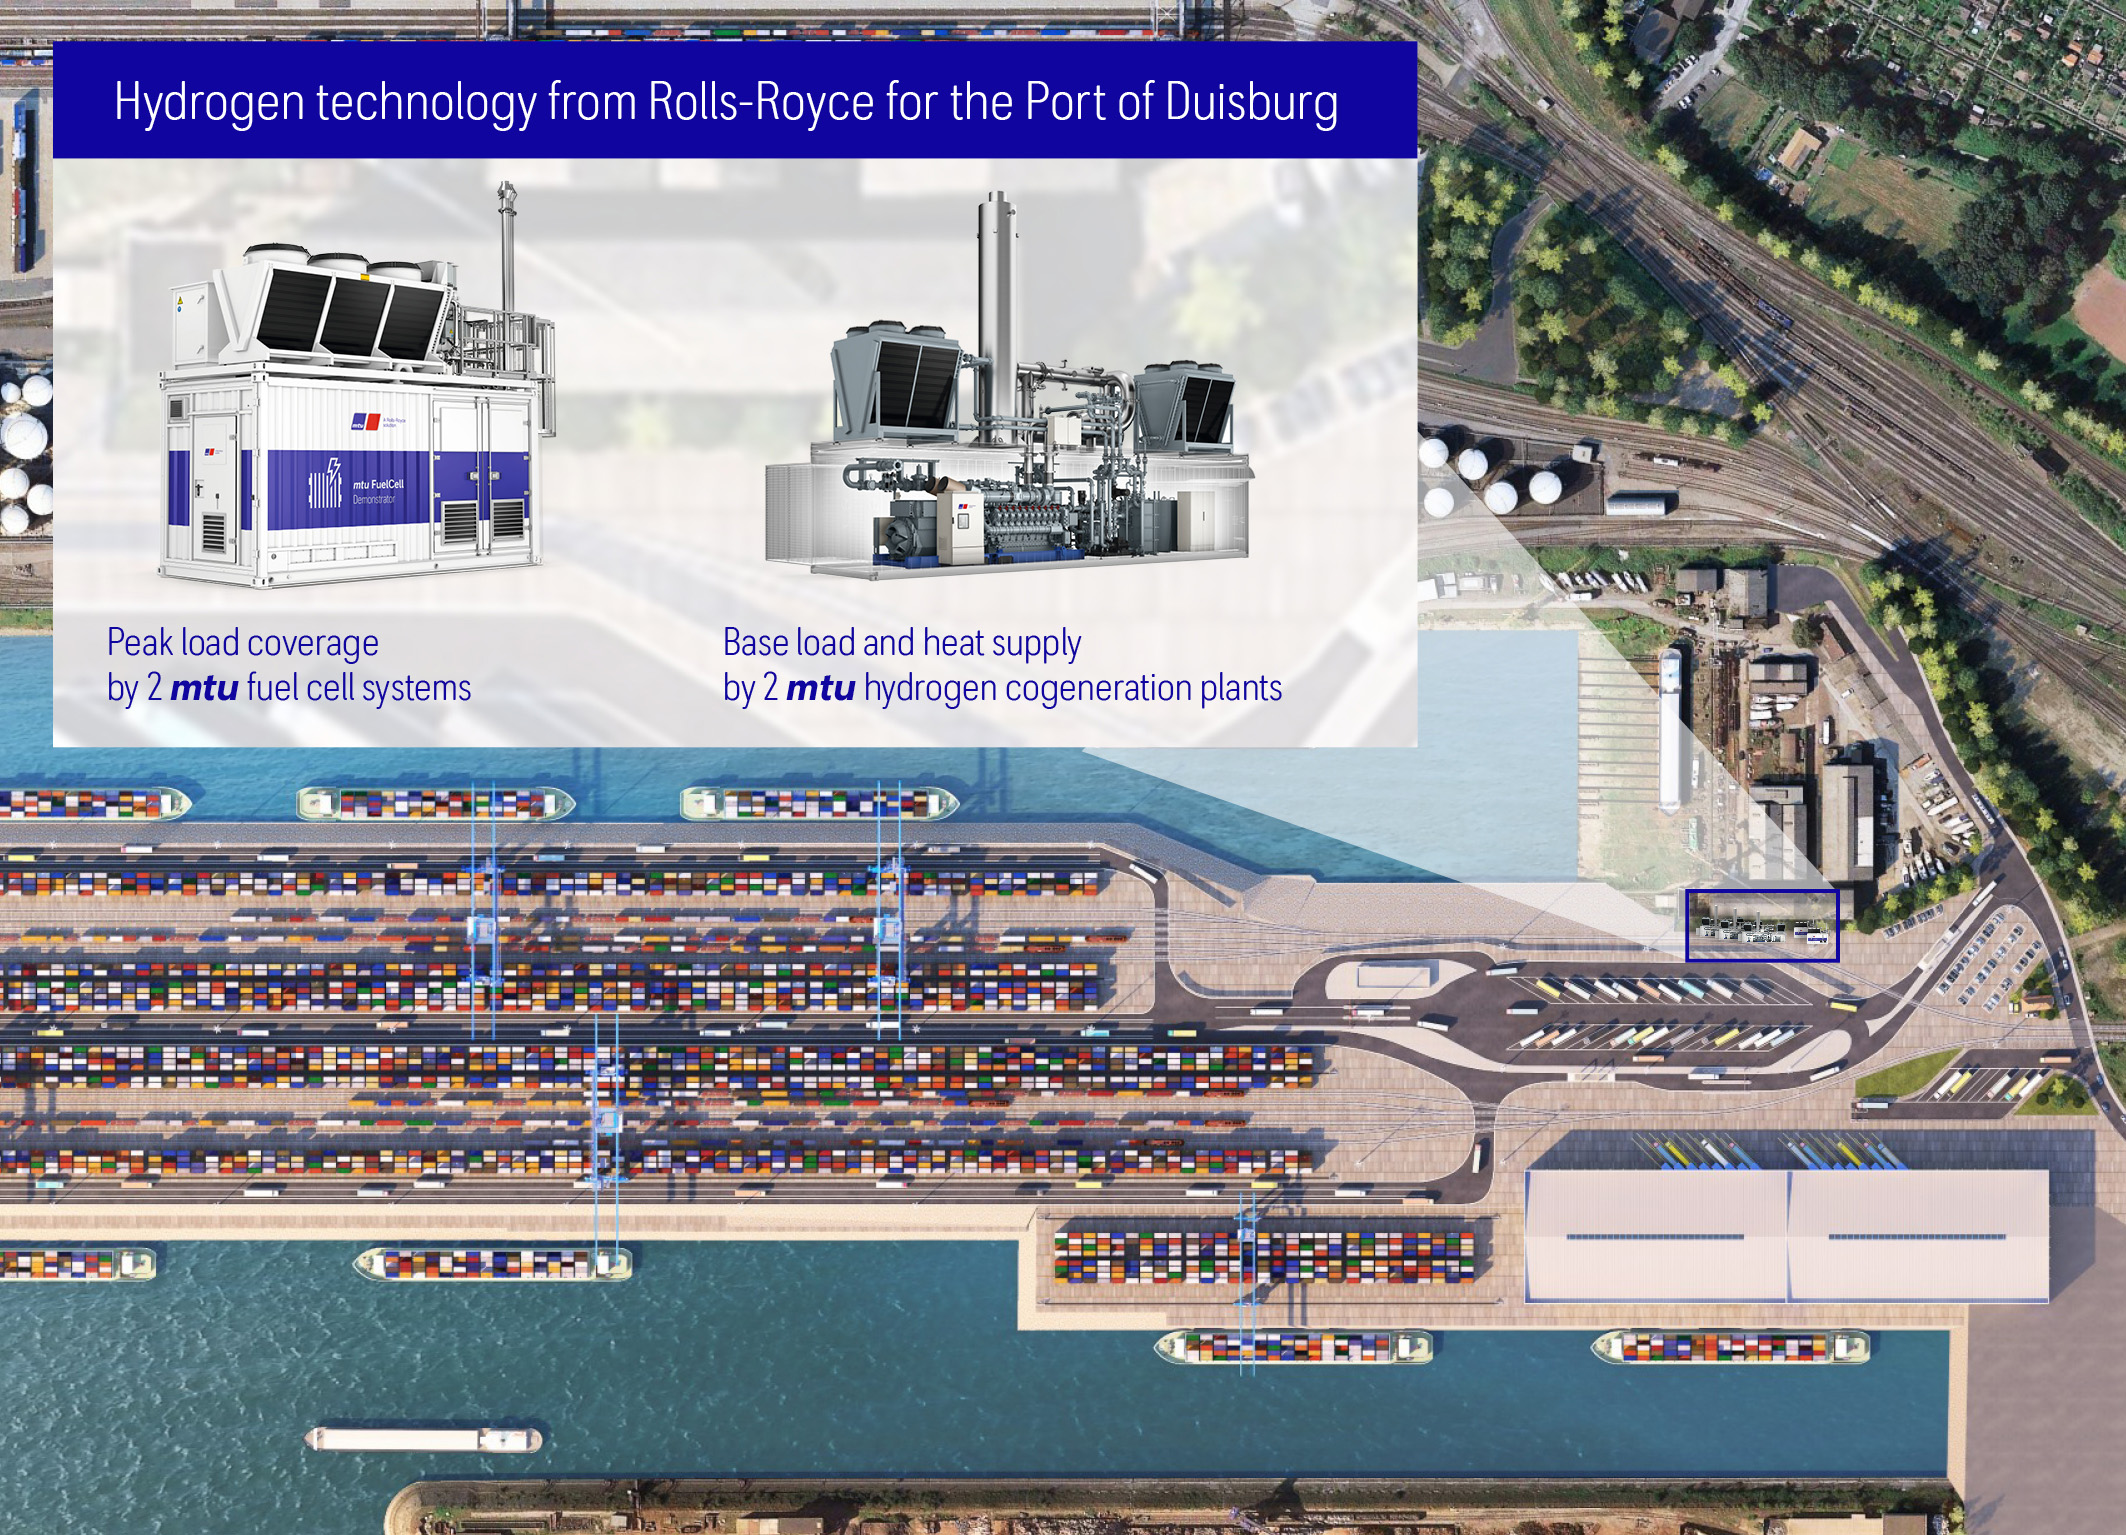 Duisport, one of the largest inland ports worldwide, will soon infuse a green hydrogen -based supply network into their new terminal as part of the funded Enerport II project, ensuring CO2-neutral energy production through mtu fuel cell systems and mtu Series 4000 hydrogen engines.